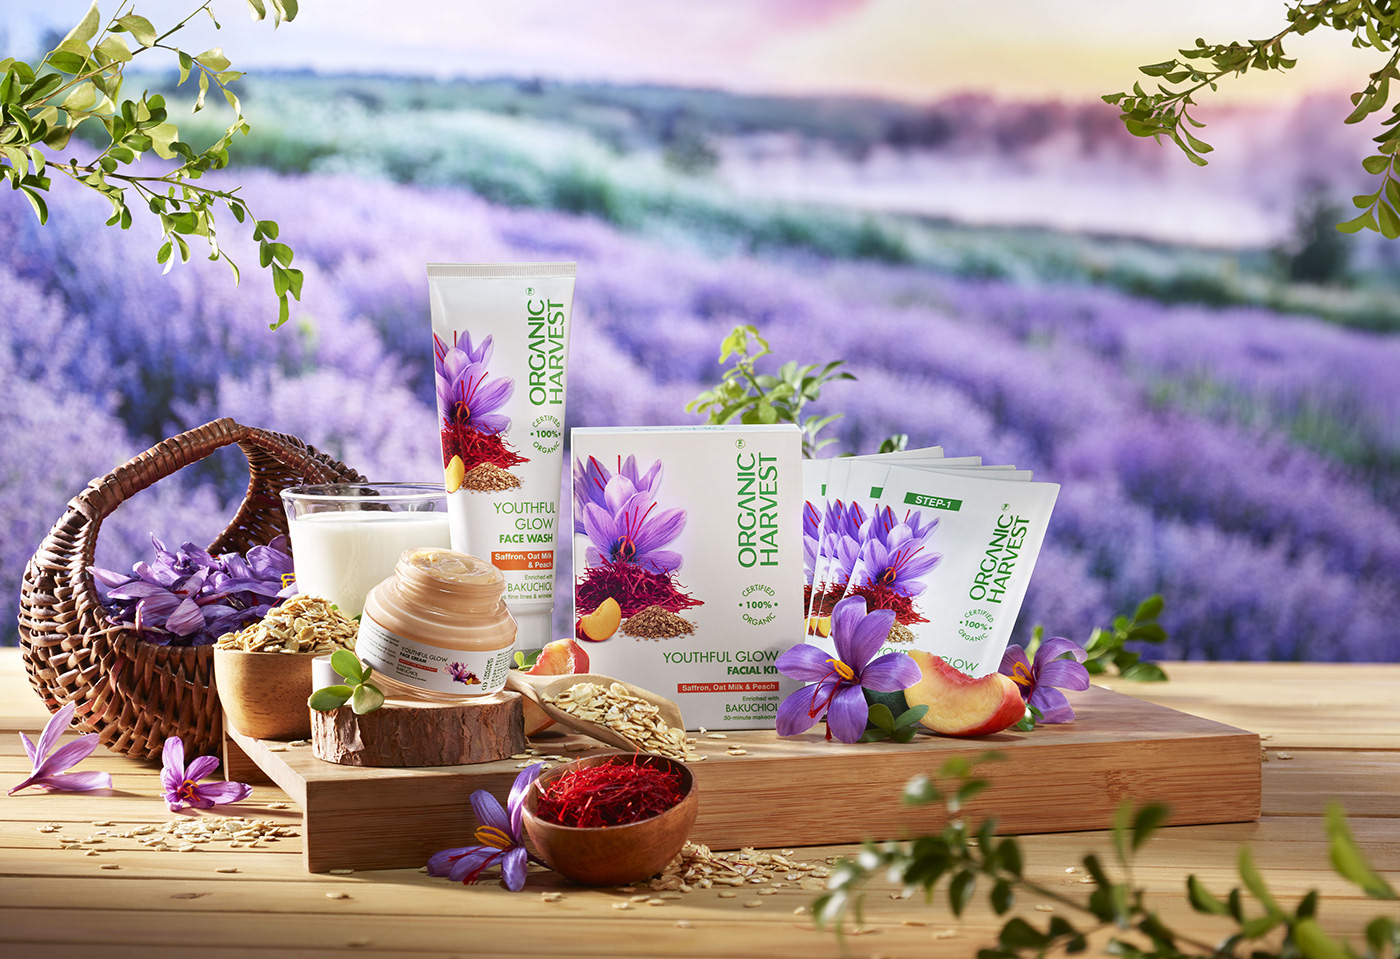 Kesar based beauty products shot with real kesar flowers on a rustic farm-inspired setup.